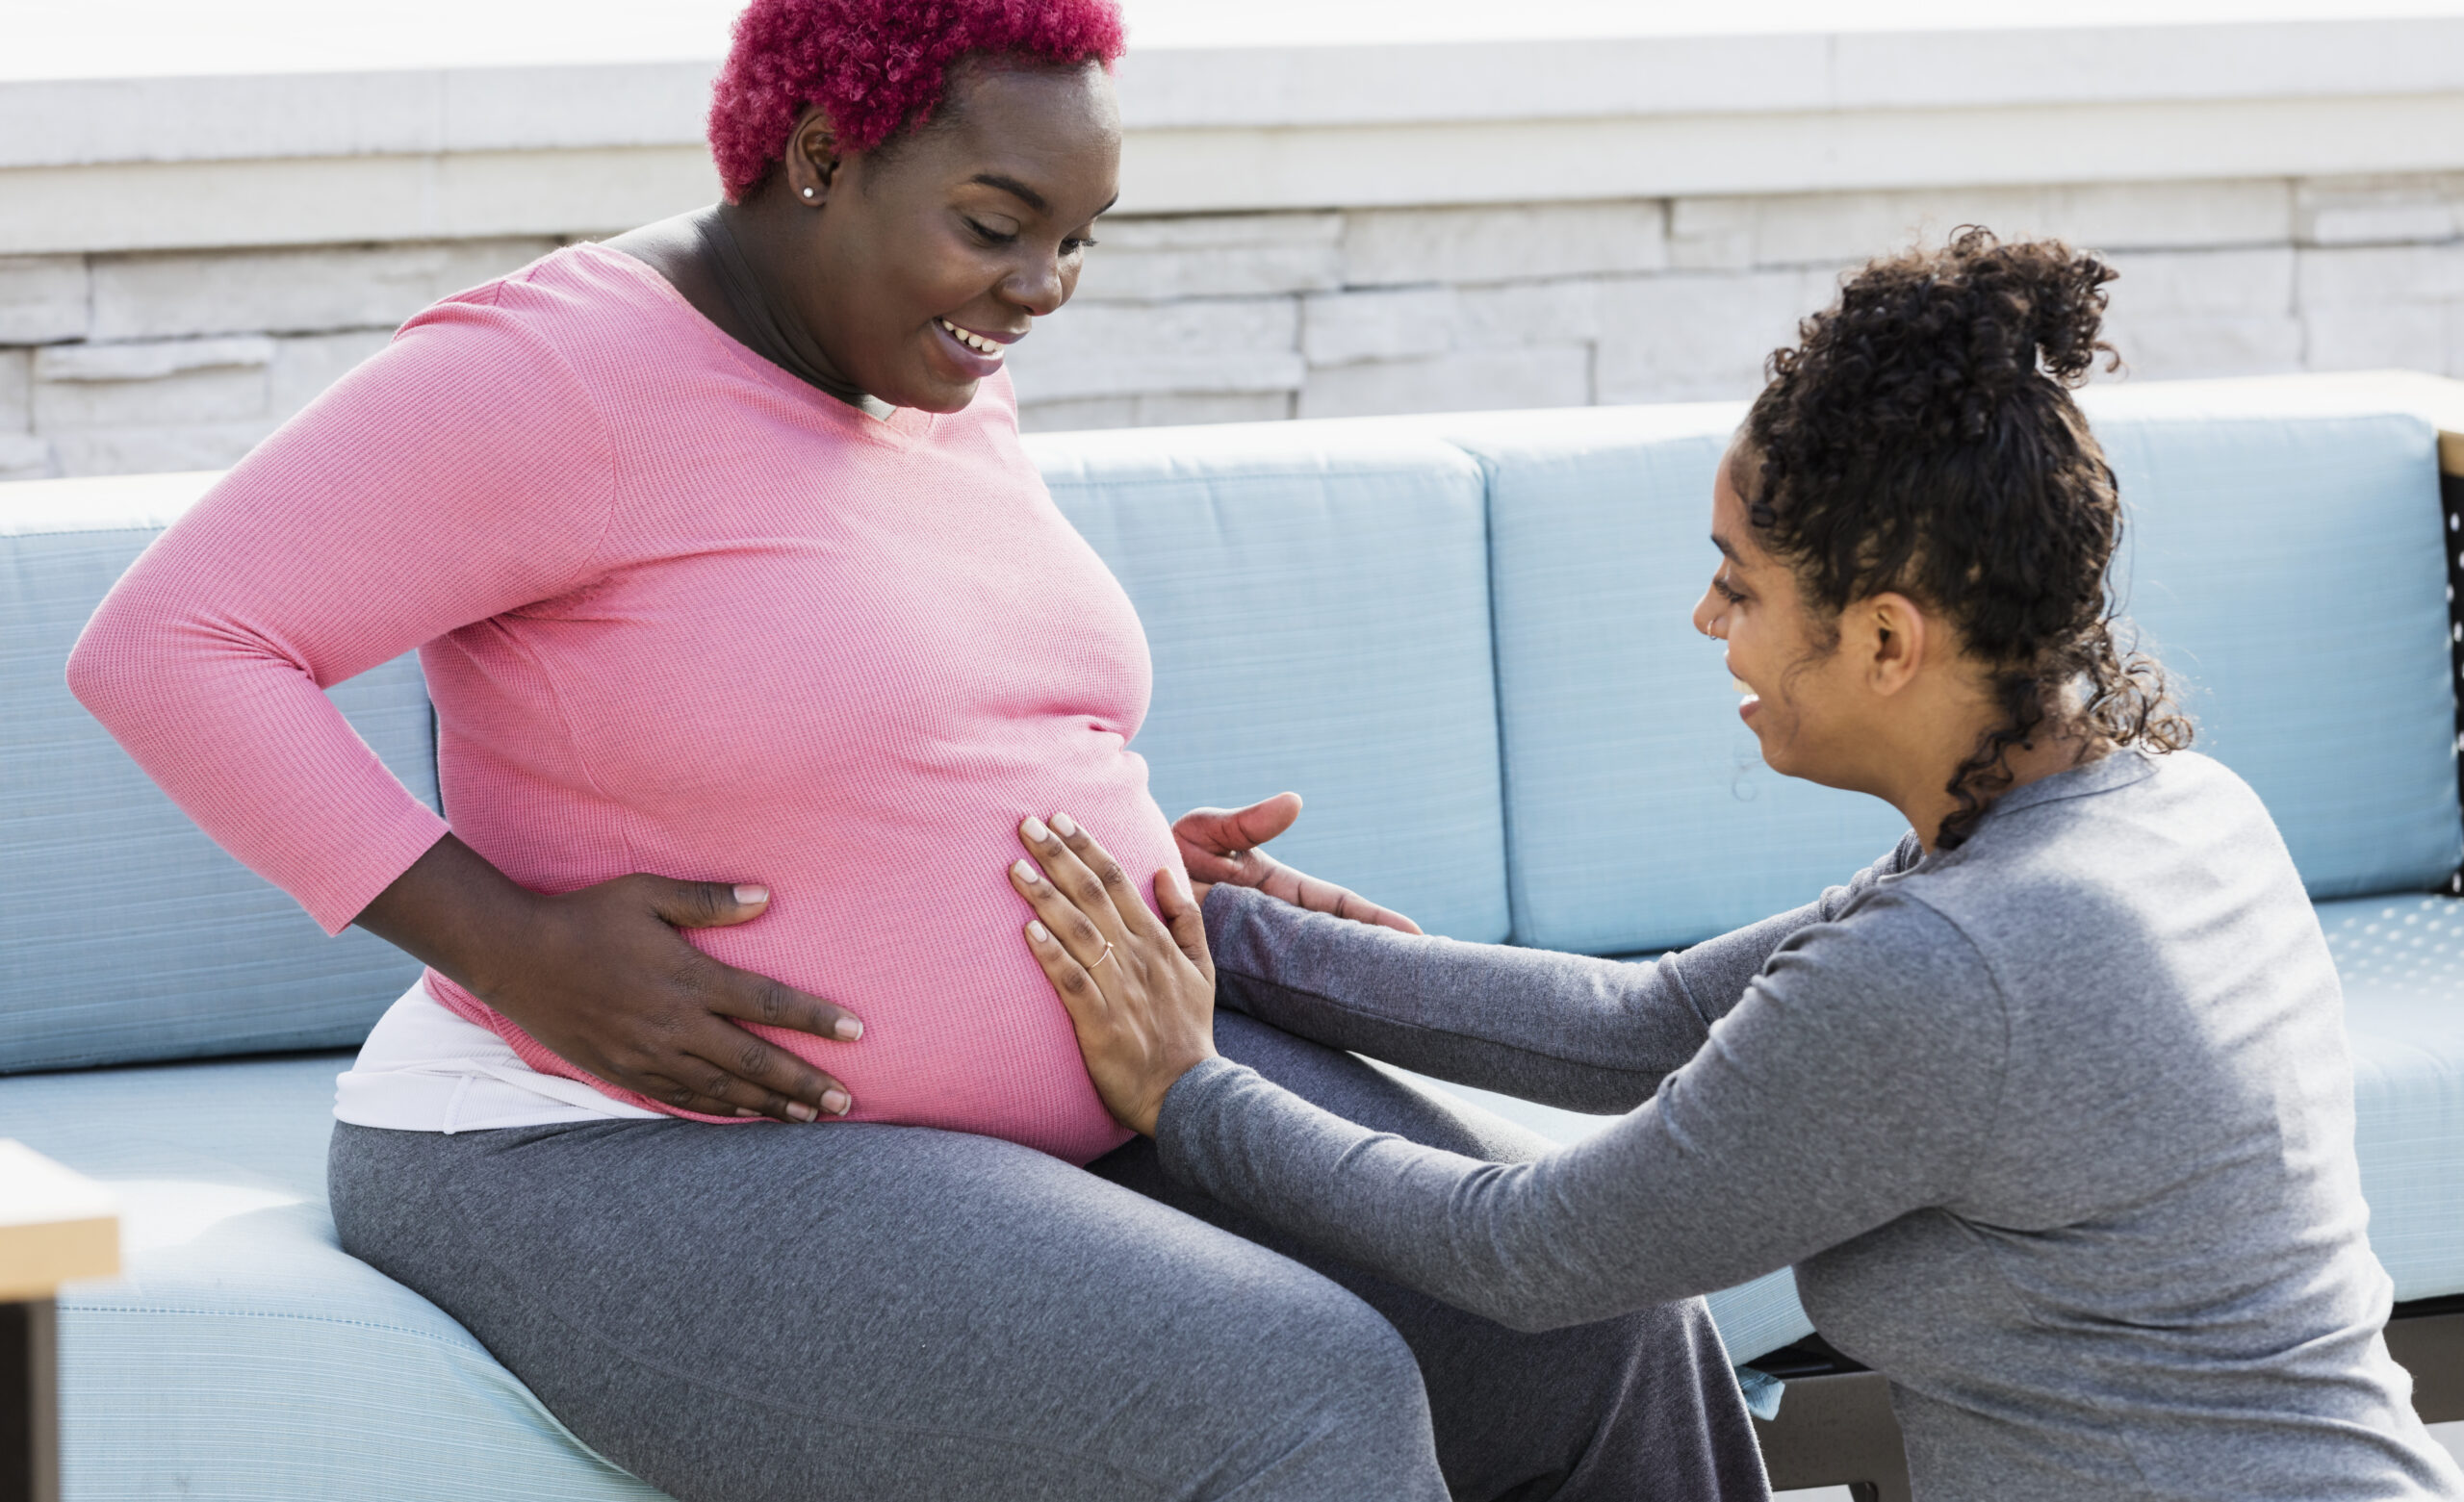 Doula kneeling, placing hands on pregnant patient's baby bump